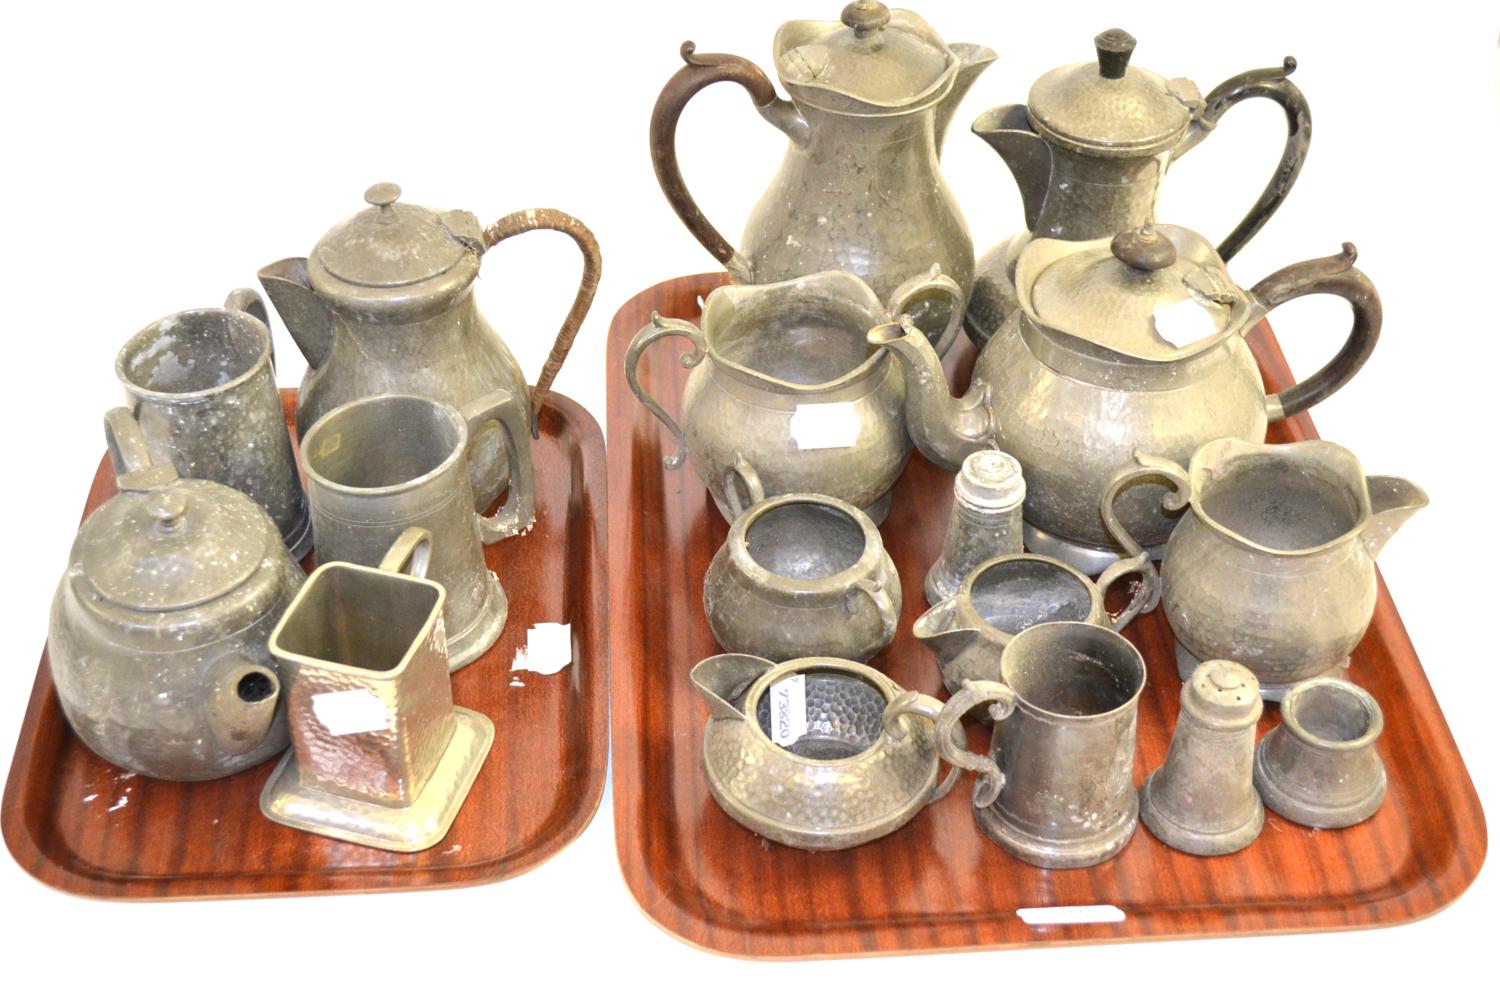 Quantity of pewter including teapots, tankards, jugs, etc